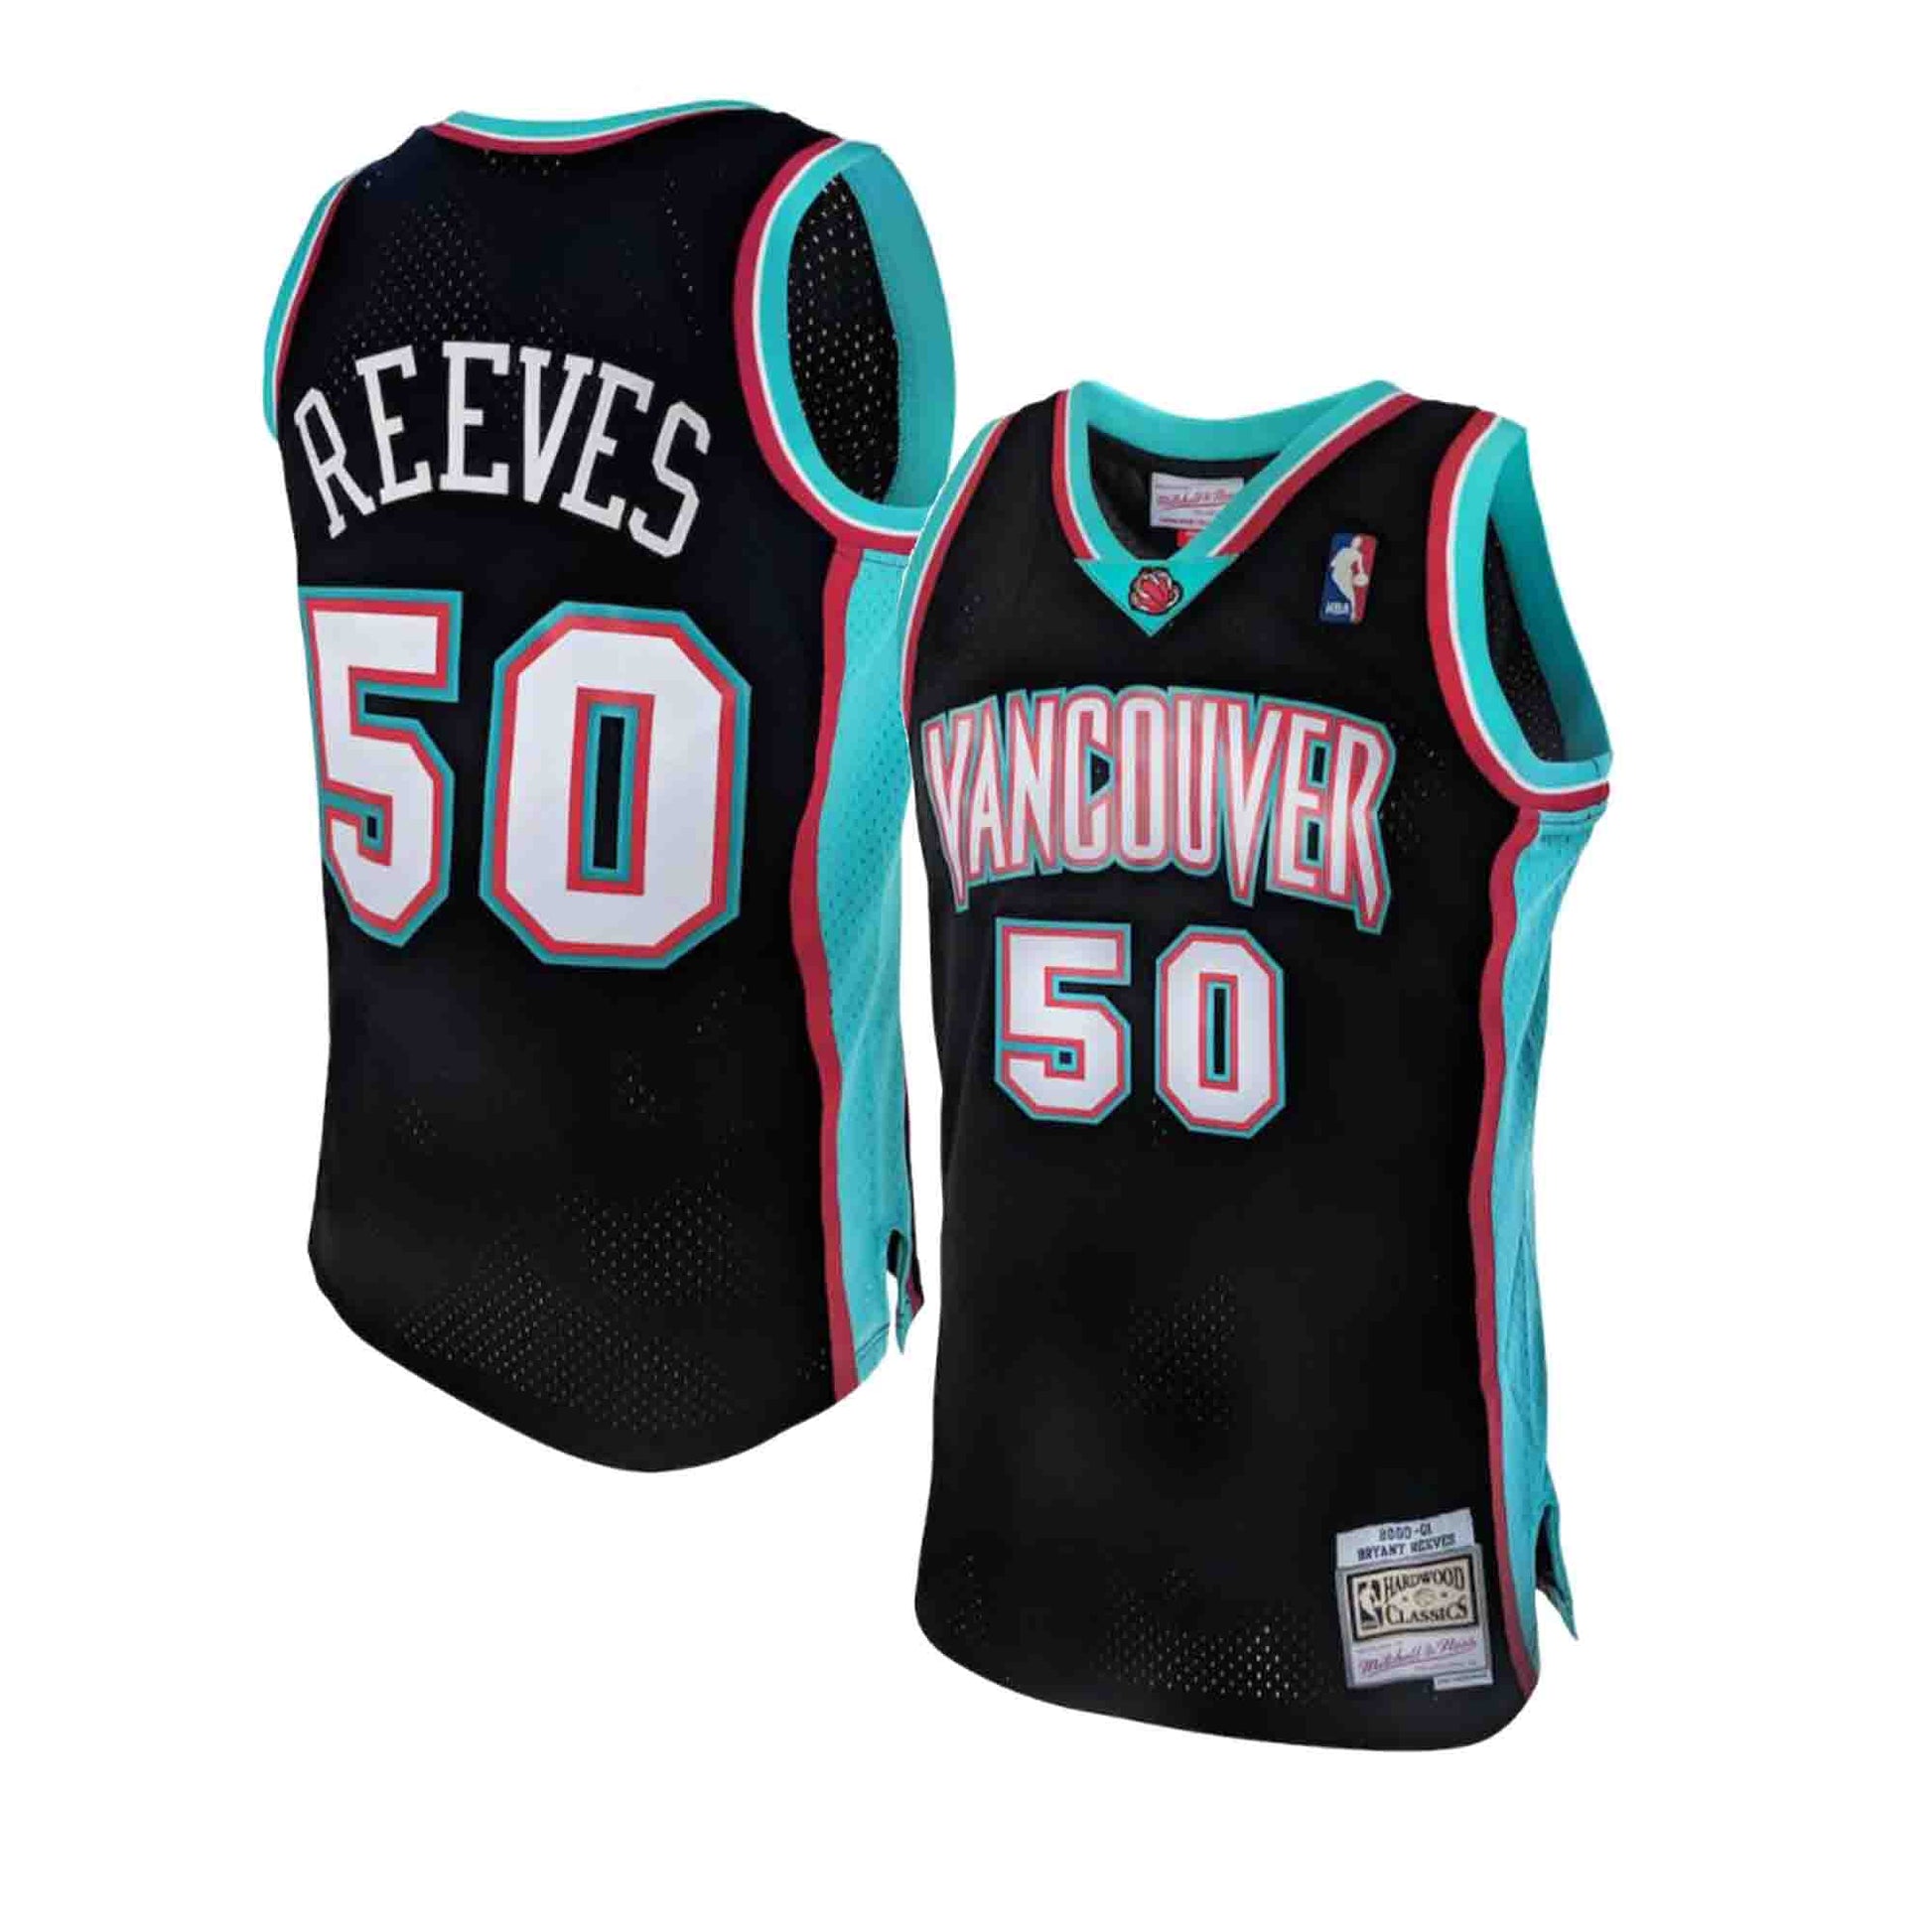 Vintage 1995-96 Bryant Reeves Vancouver Grizzlies Champion Jersey size 54